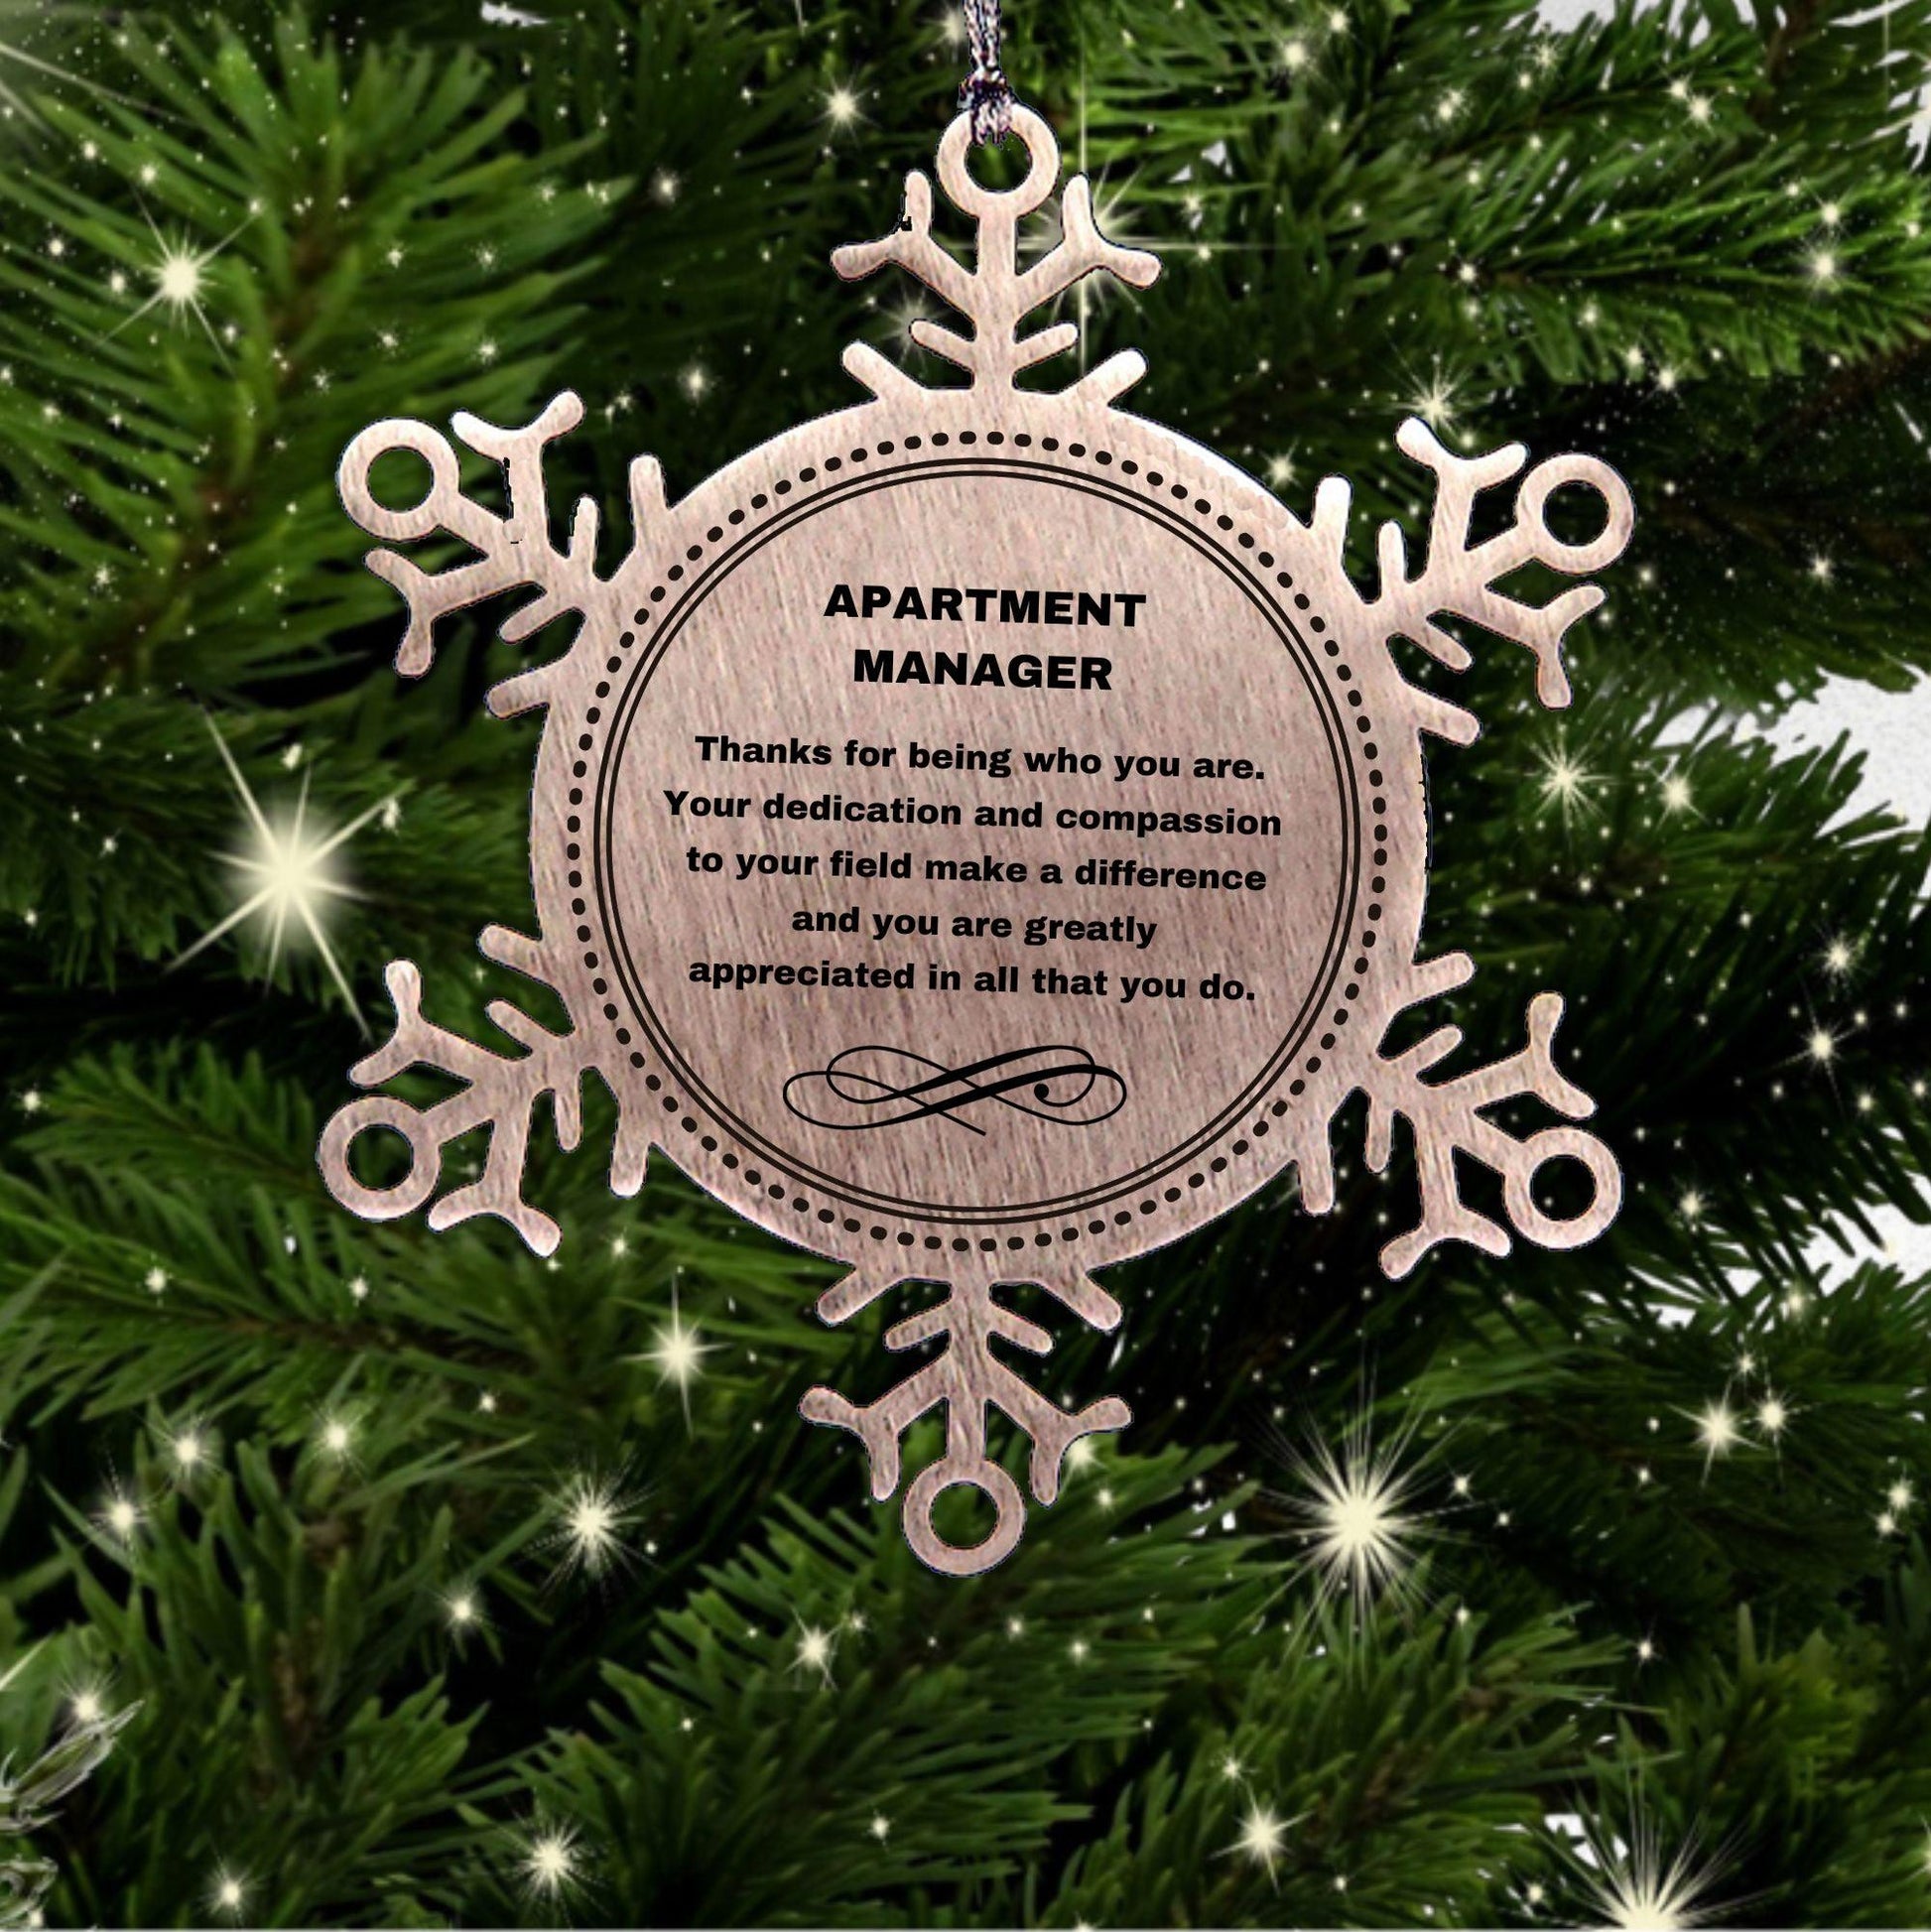 Apartment Manager Snowflake Ornament - Thanks for being who you are - Birthday Christmas Tree Gifts Coworkers Colleague Boss - Mallard Moon Gift Shop